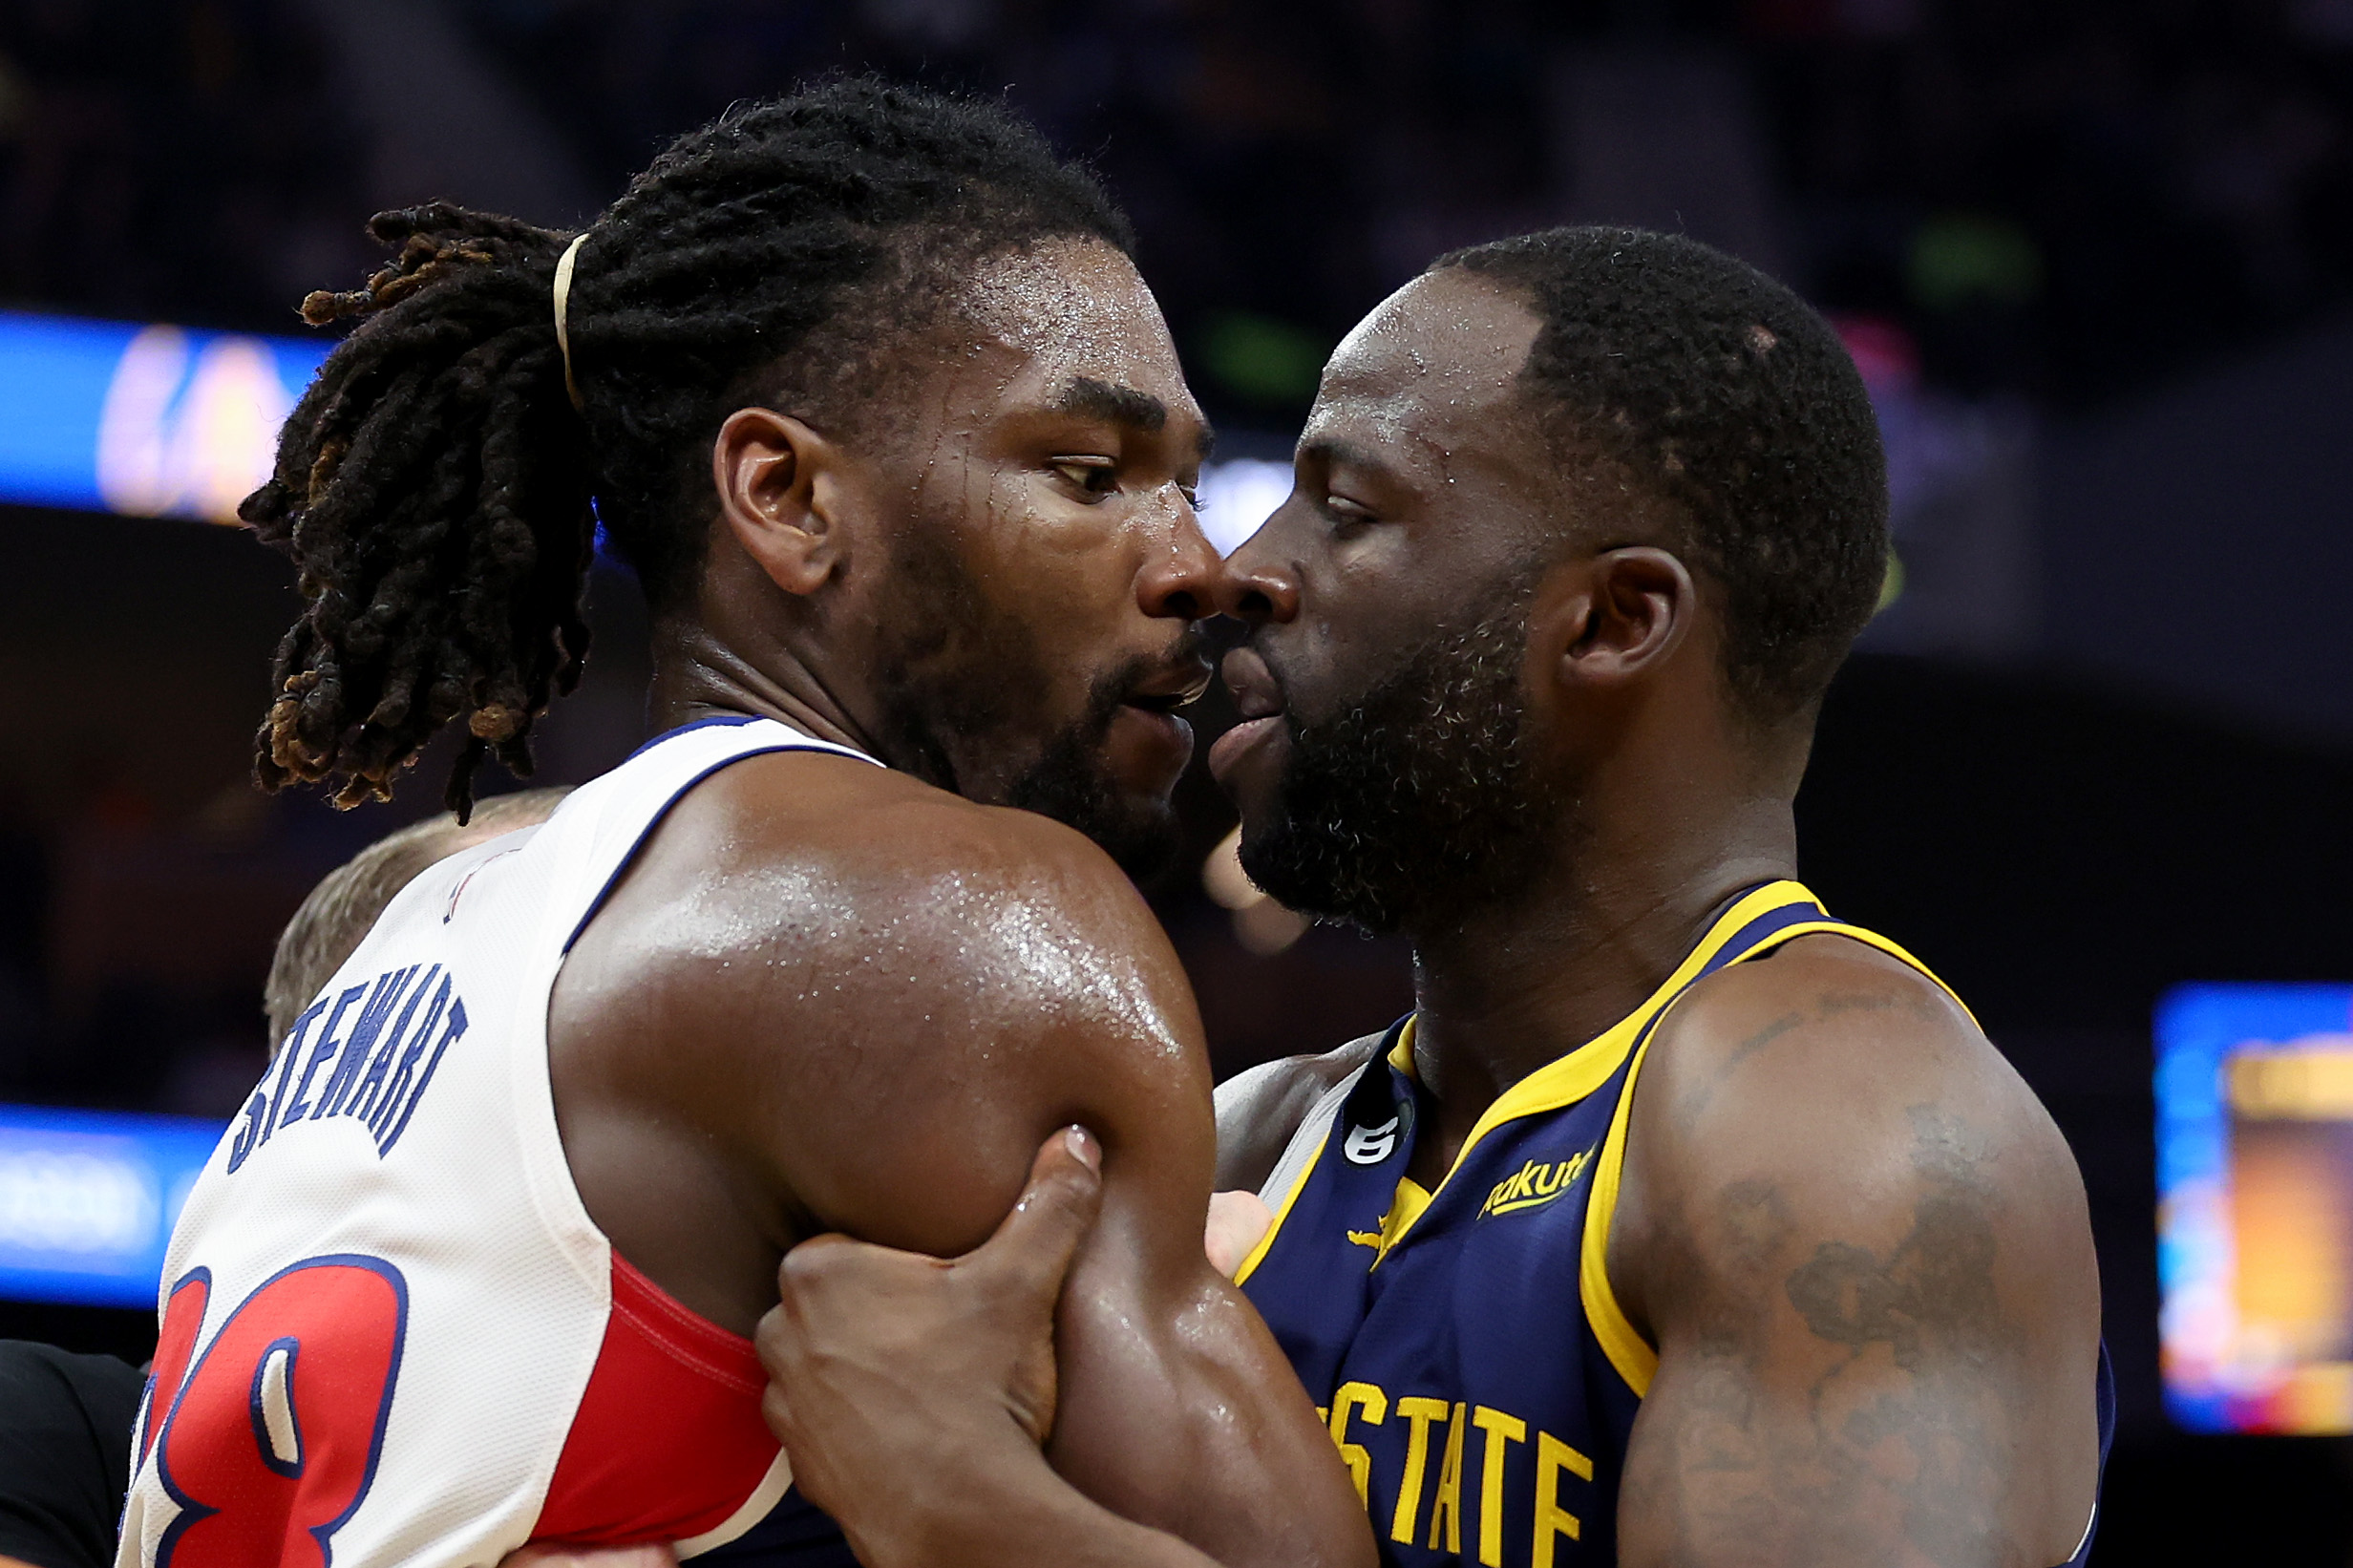 Draymond Green and Isaiah Stewart nose-to-nose while grabbing each other in an altercation